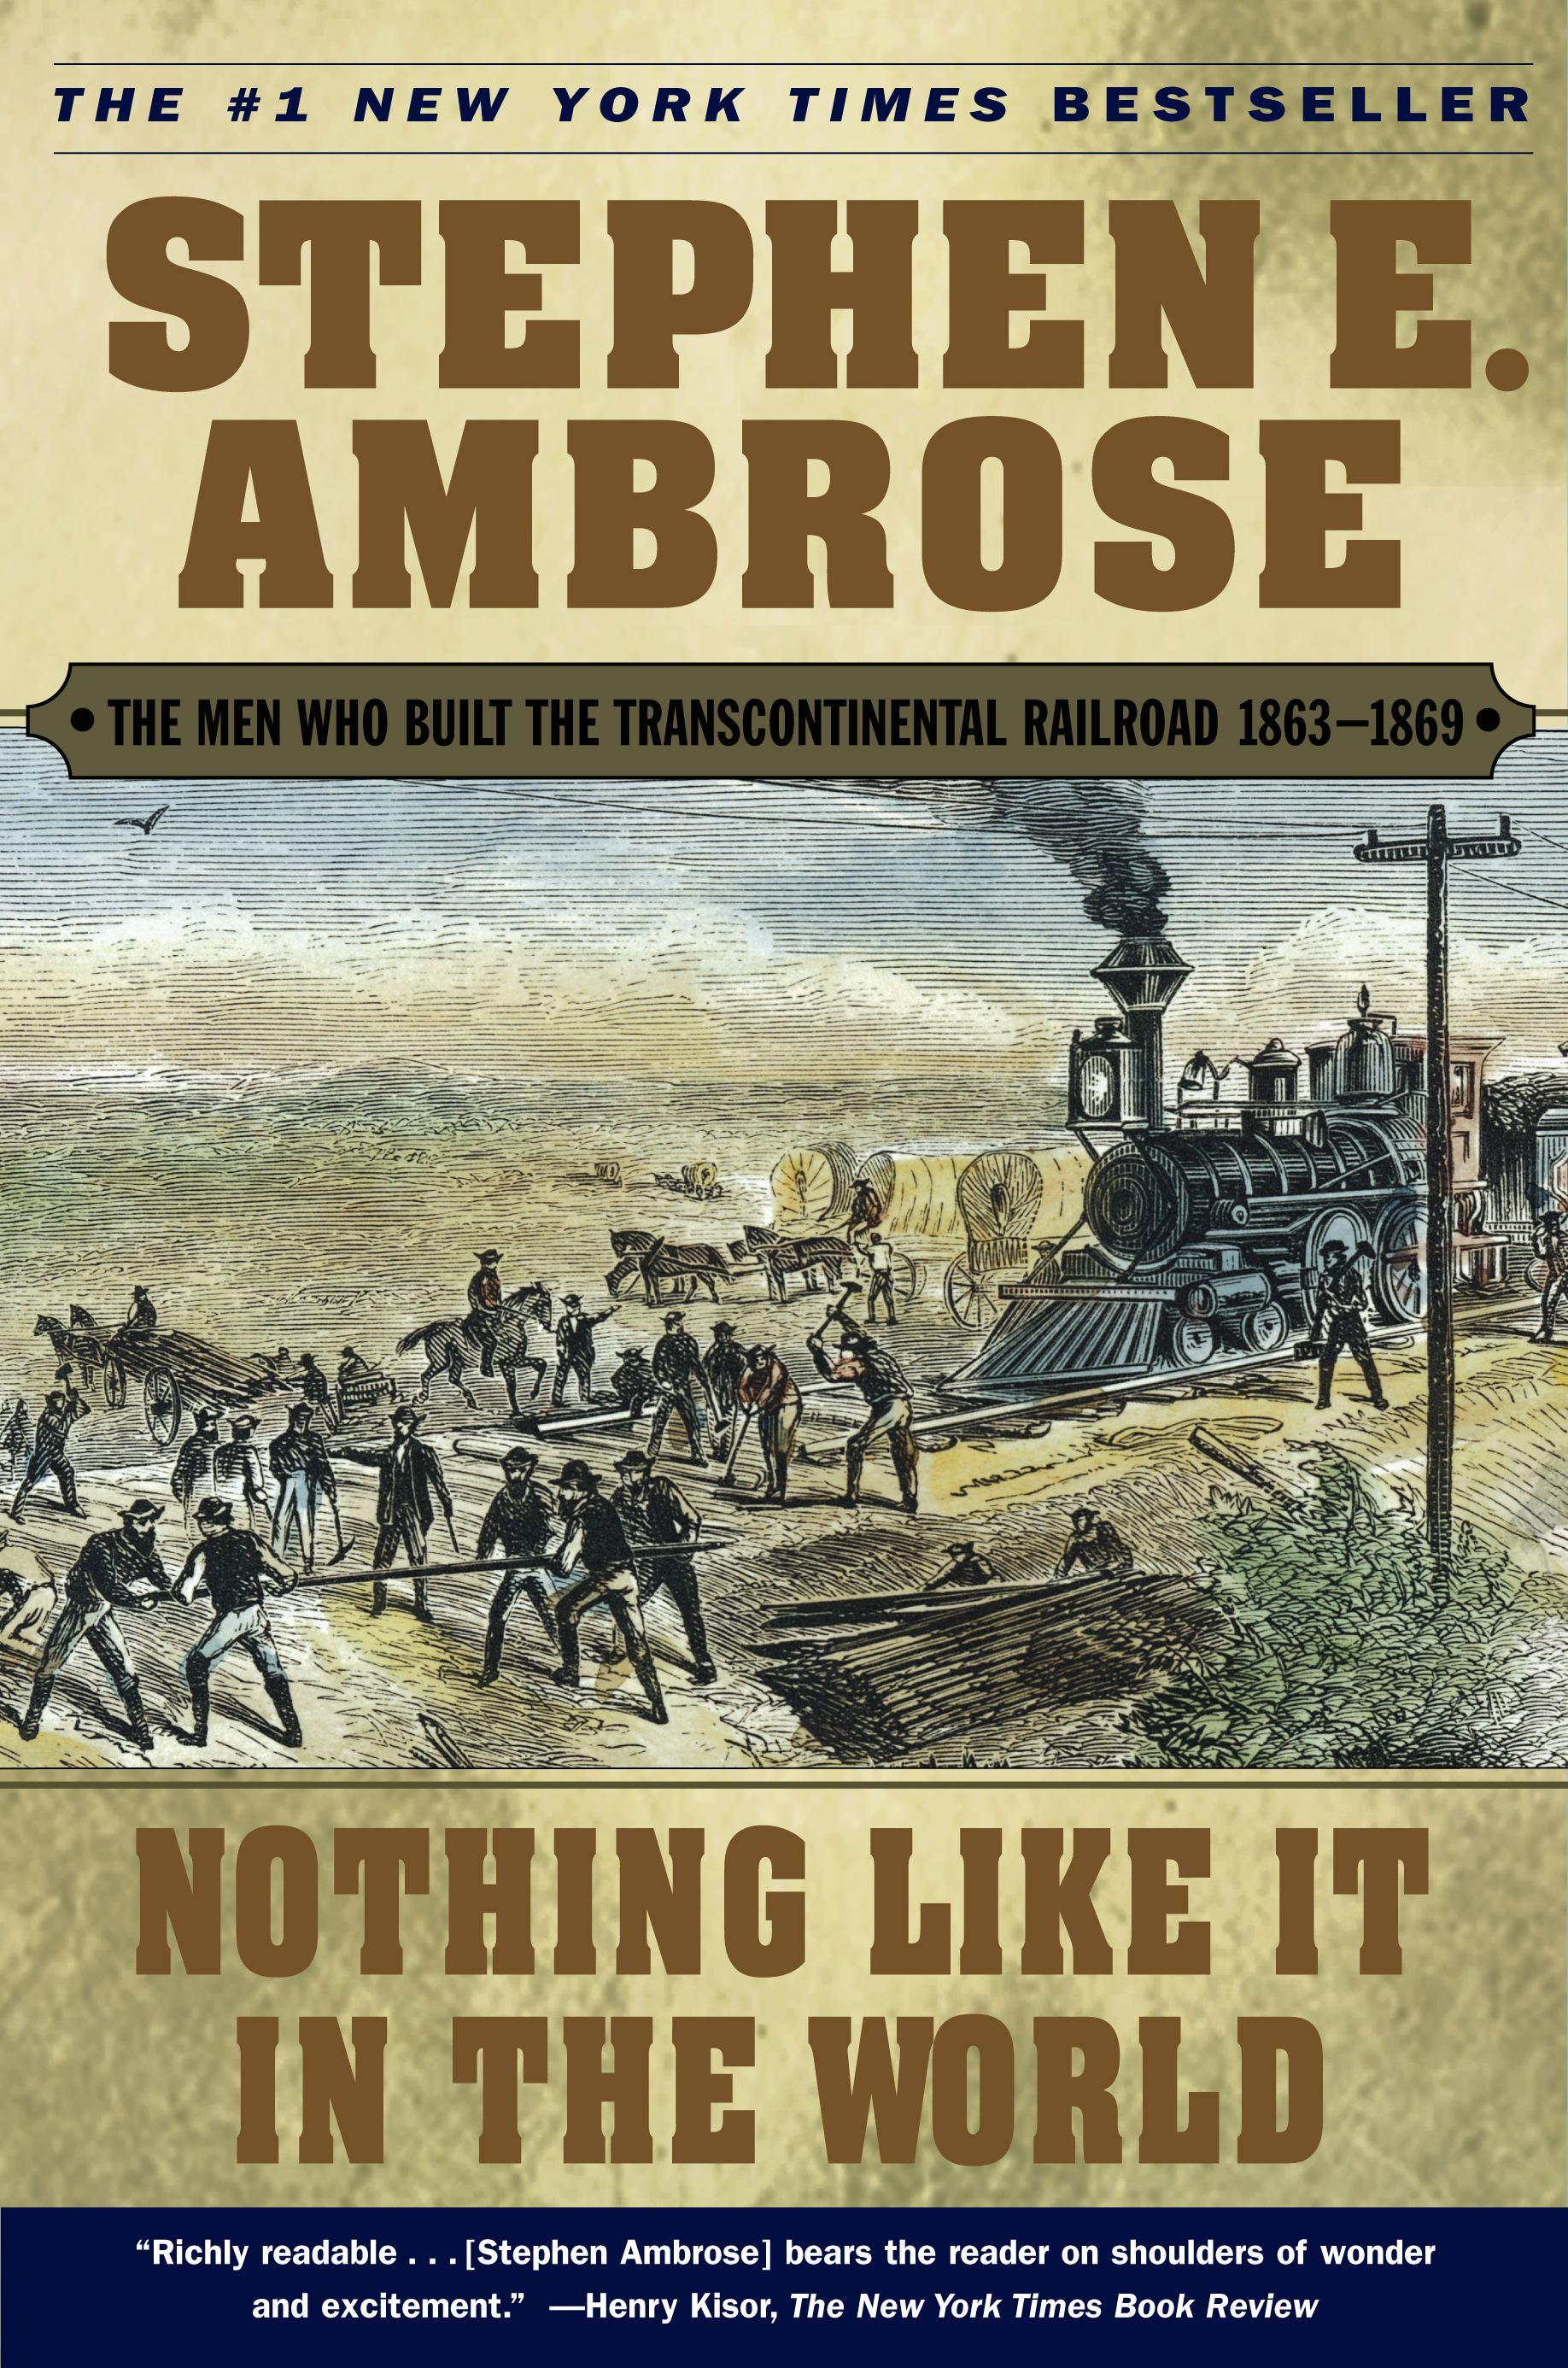 Nothing Like It in the World: The Men Who Built the Transcontinental Railroad 1863-1869 | Stephen E. Ambrose | Taschenbuch | Men Who Built the Transcontine | Kartoniert / Broschiert | Englisch | 2001 - Ambrose, Stephen E.